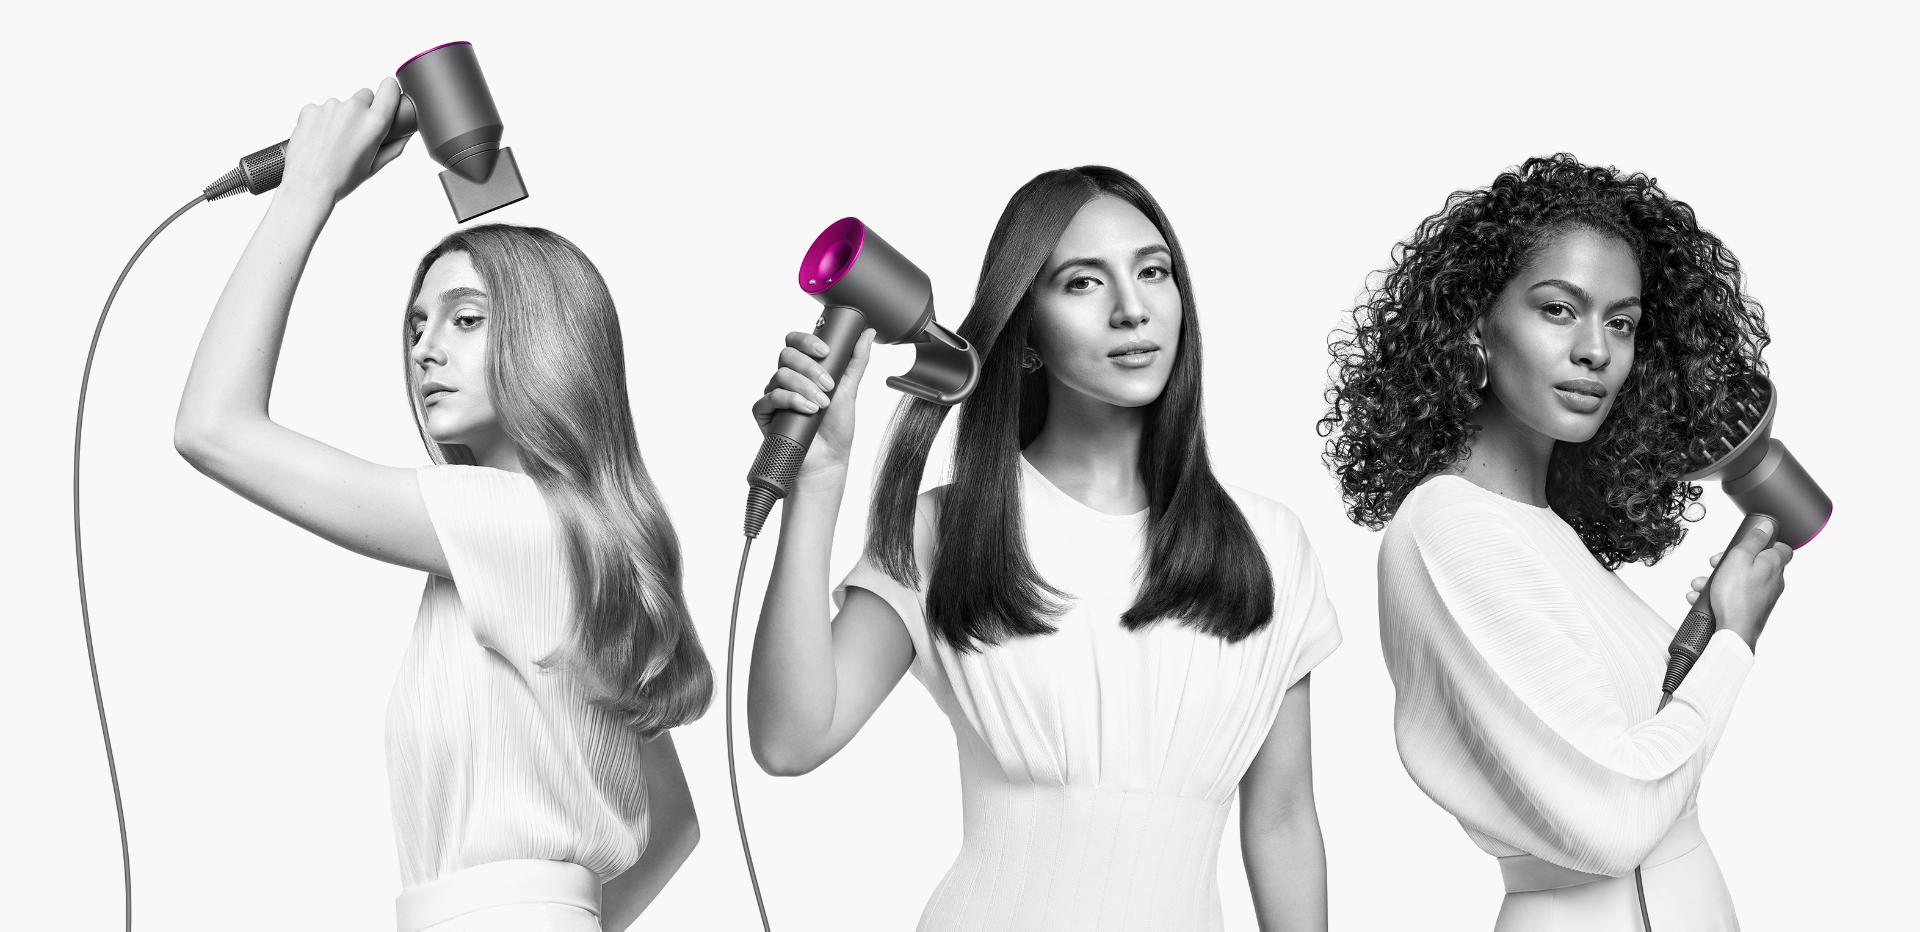 Three models with different hair types using different attachments to style their hair